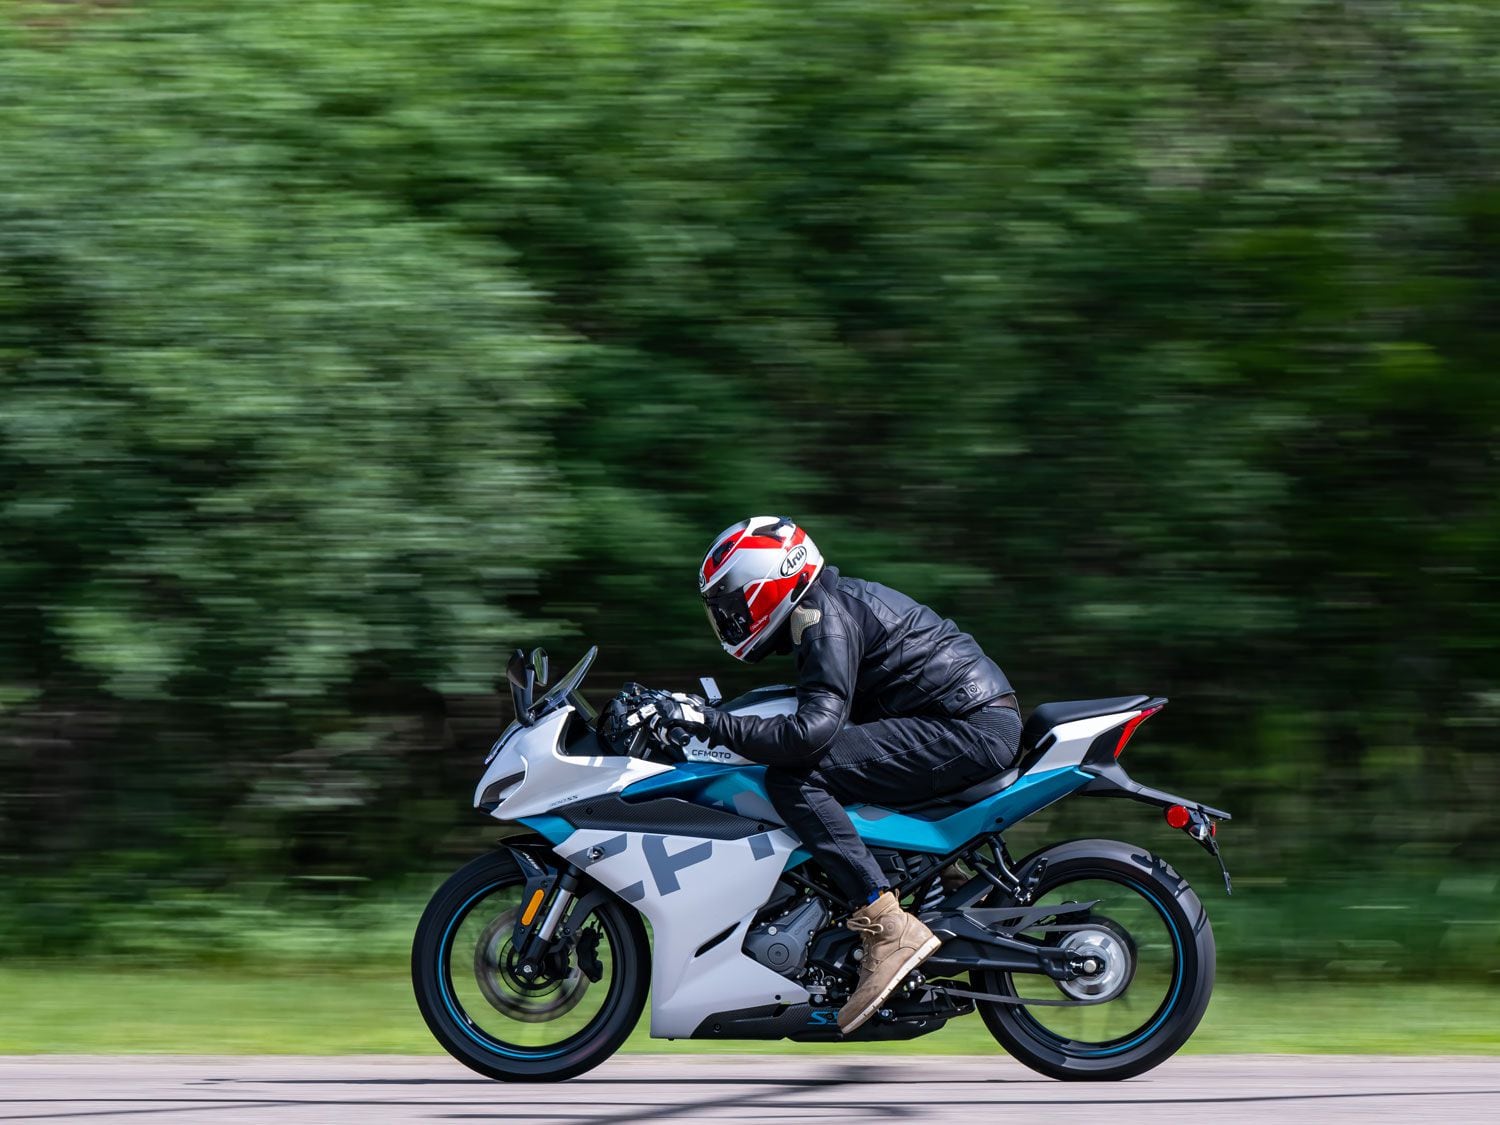 The 300SS is CFMoto’s top-selling motorcycle so far.